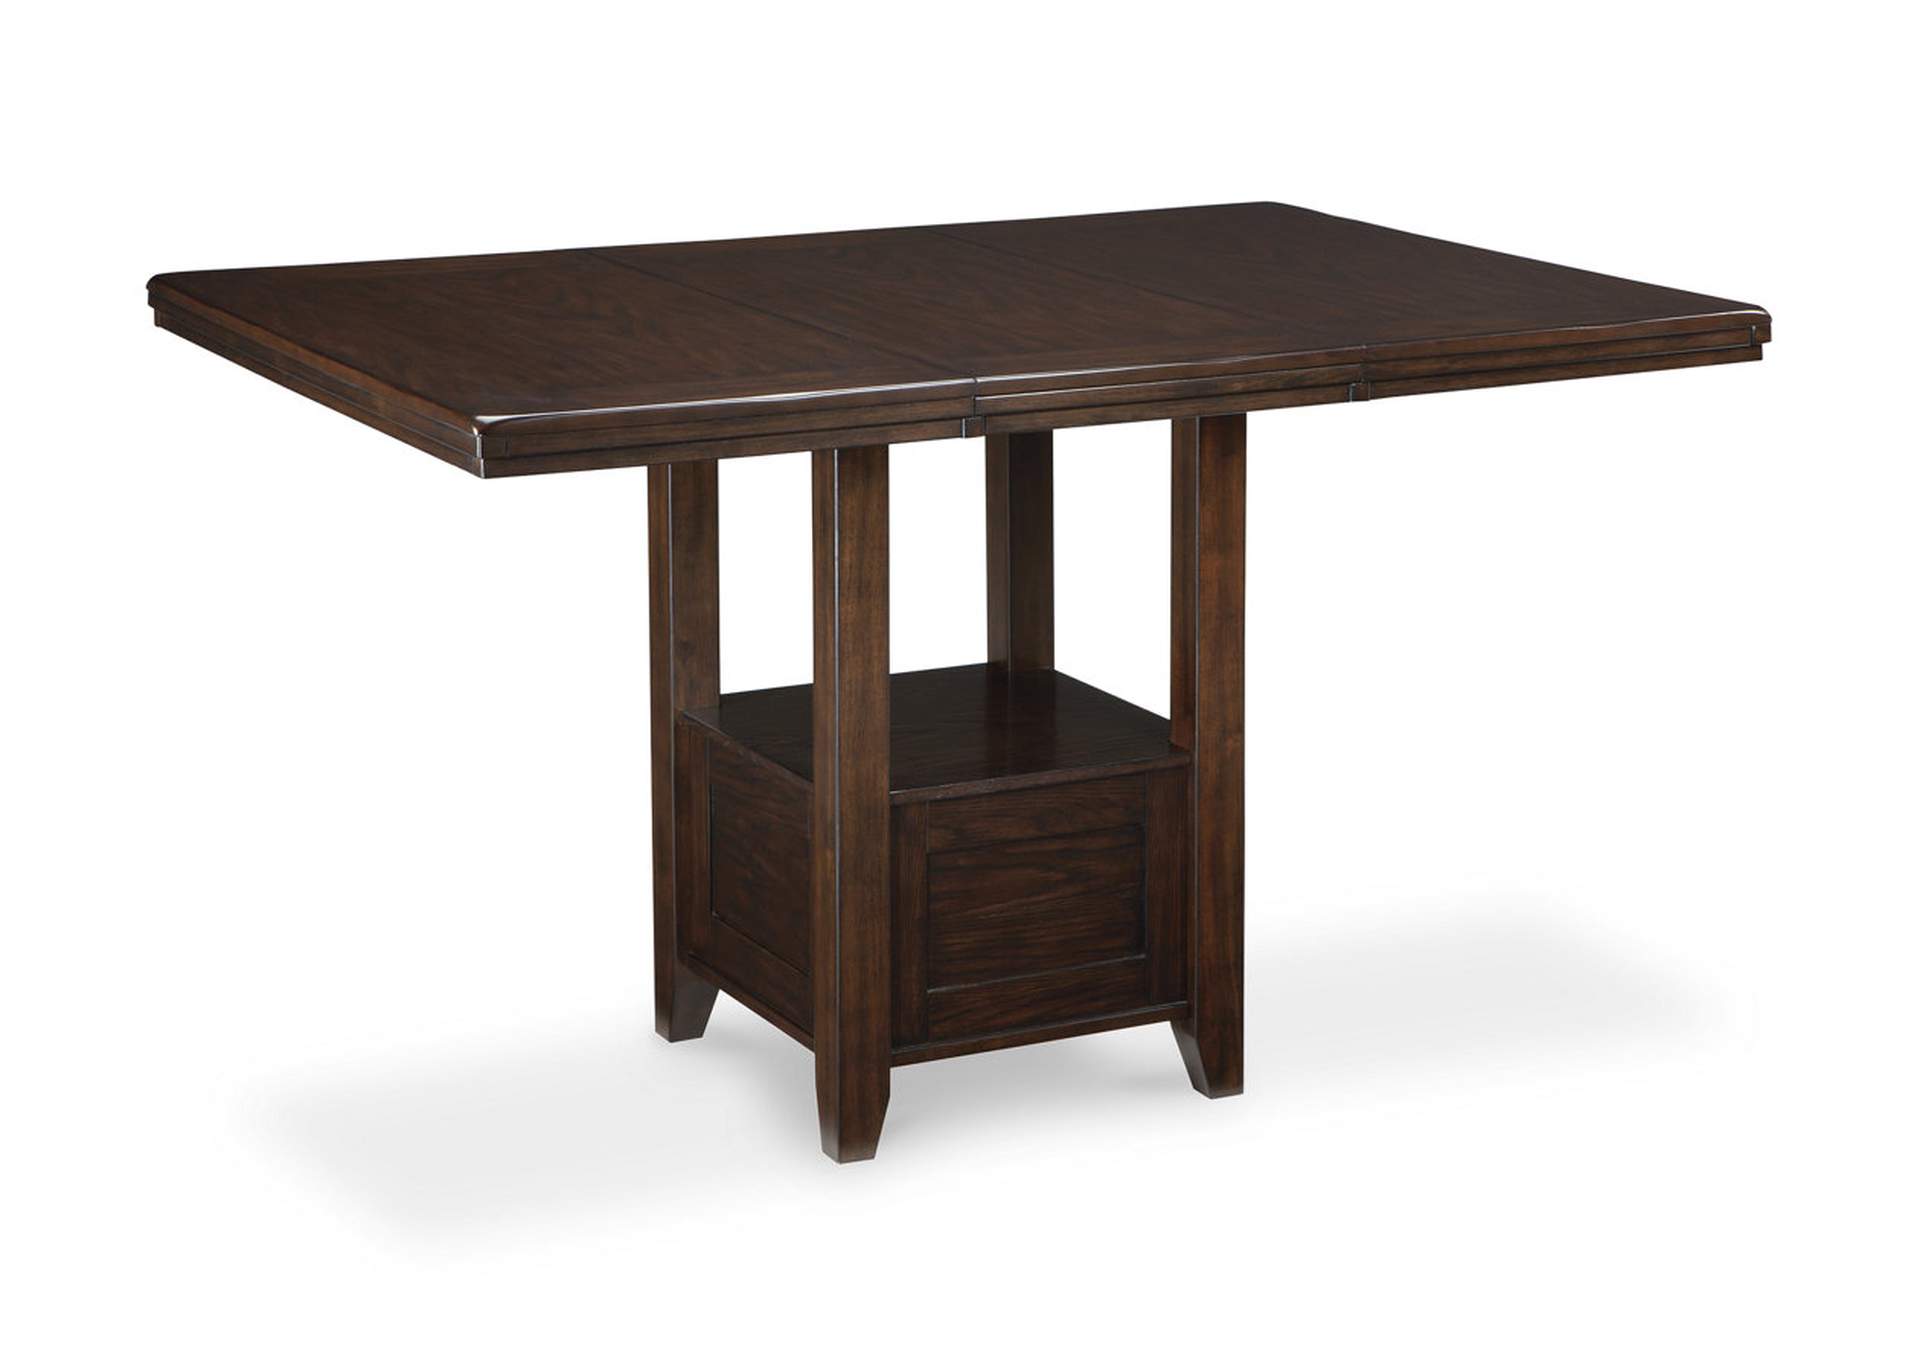 Haddigan Counter Height Dining Table with 4 Barstools,Signature Design By Ashley